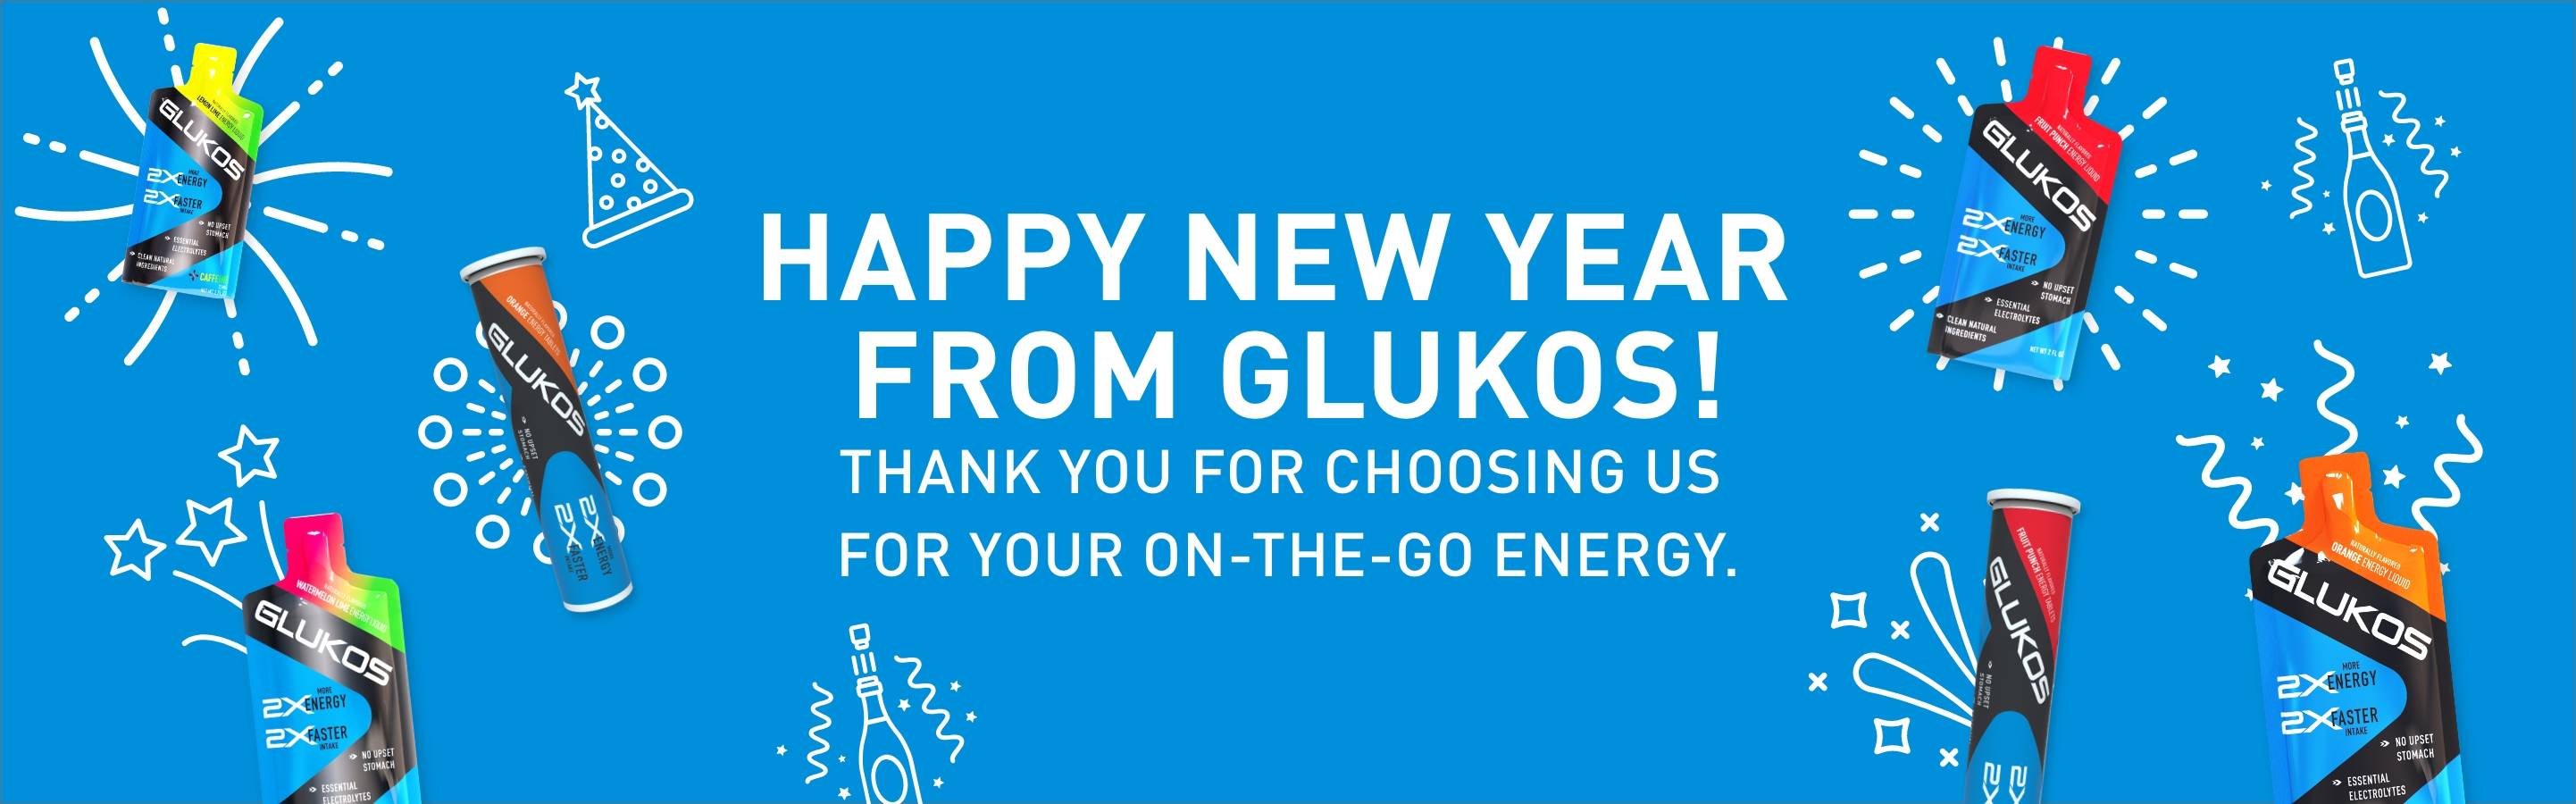 Happy New Year from Glukos! Thank you for choosing us for your on-the-go energy.